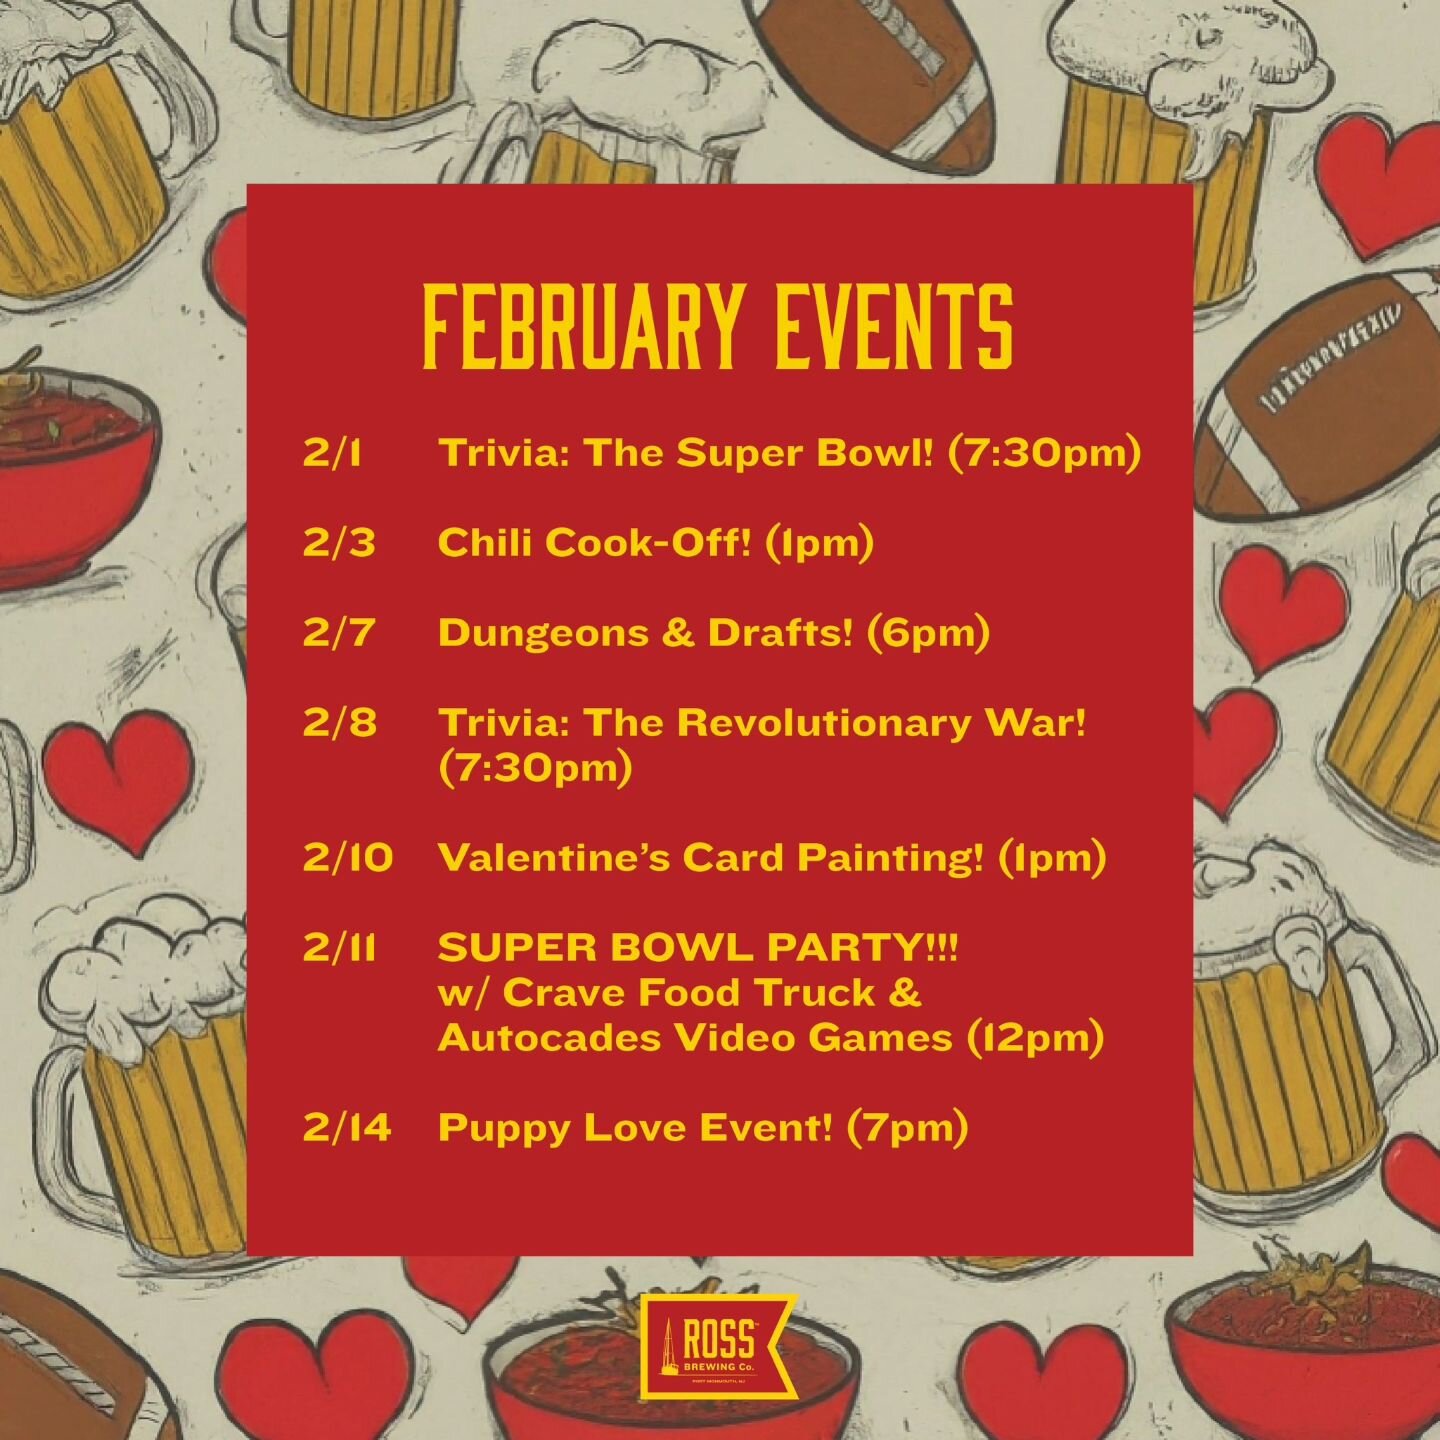 𝗗𝗥𝗬 𝗝𝗔𝗡𝗨𝗔𝗥𝗬 𝗜𝗦 𝗢𝗩𝗘𝗥!!! Let's celebrate throughout 𝗙𝗘𝗕𝗥𝗨𝗔𝗥𝗬 with a month of amazing events! ❤️🏈🔥🍻

After a month of no drinking for many of you, we know you're ready to start February off right with some amazing beers from t